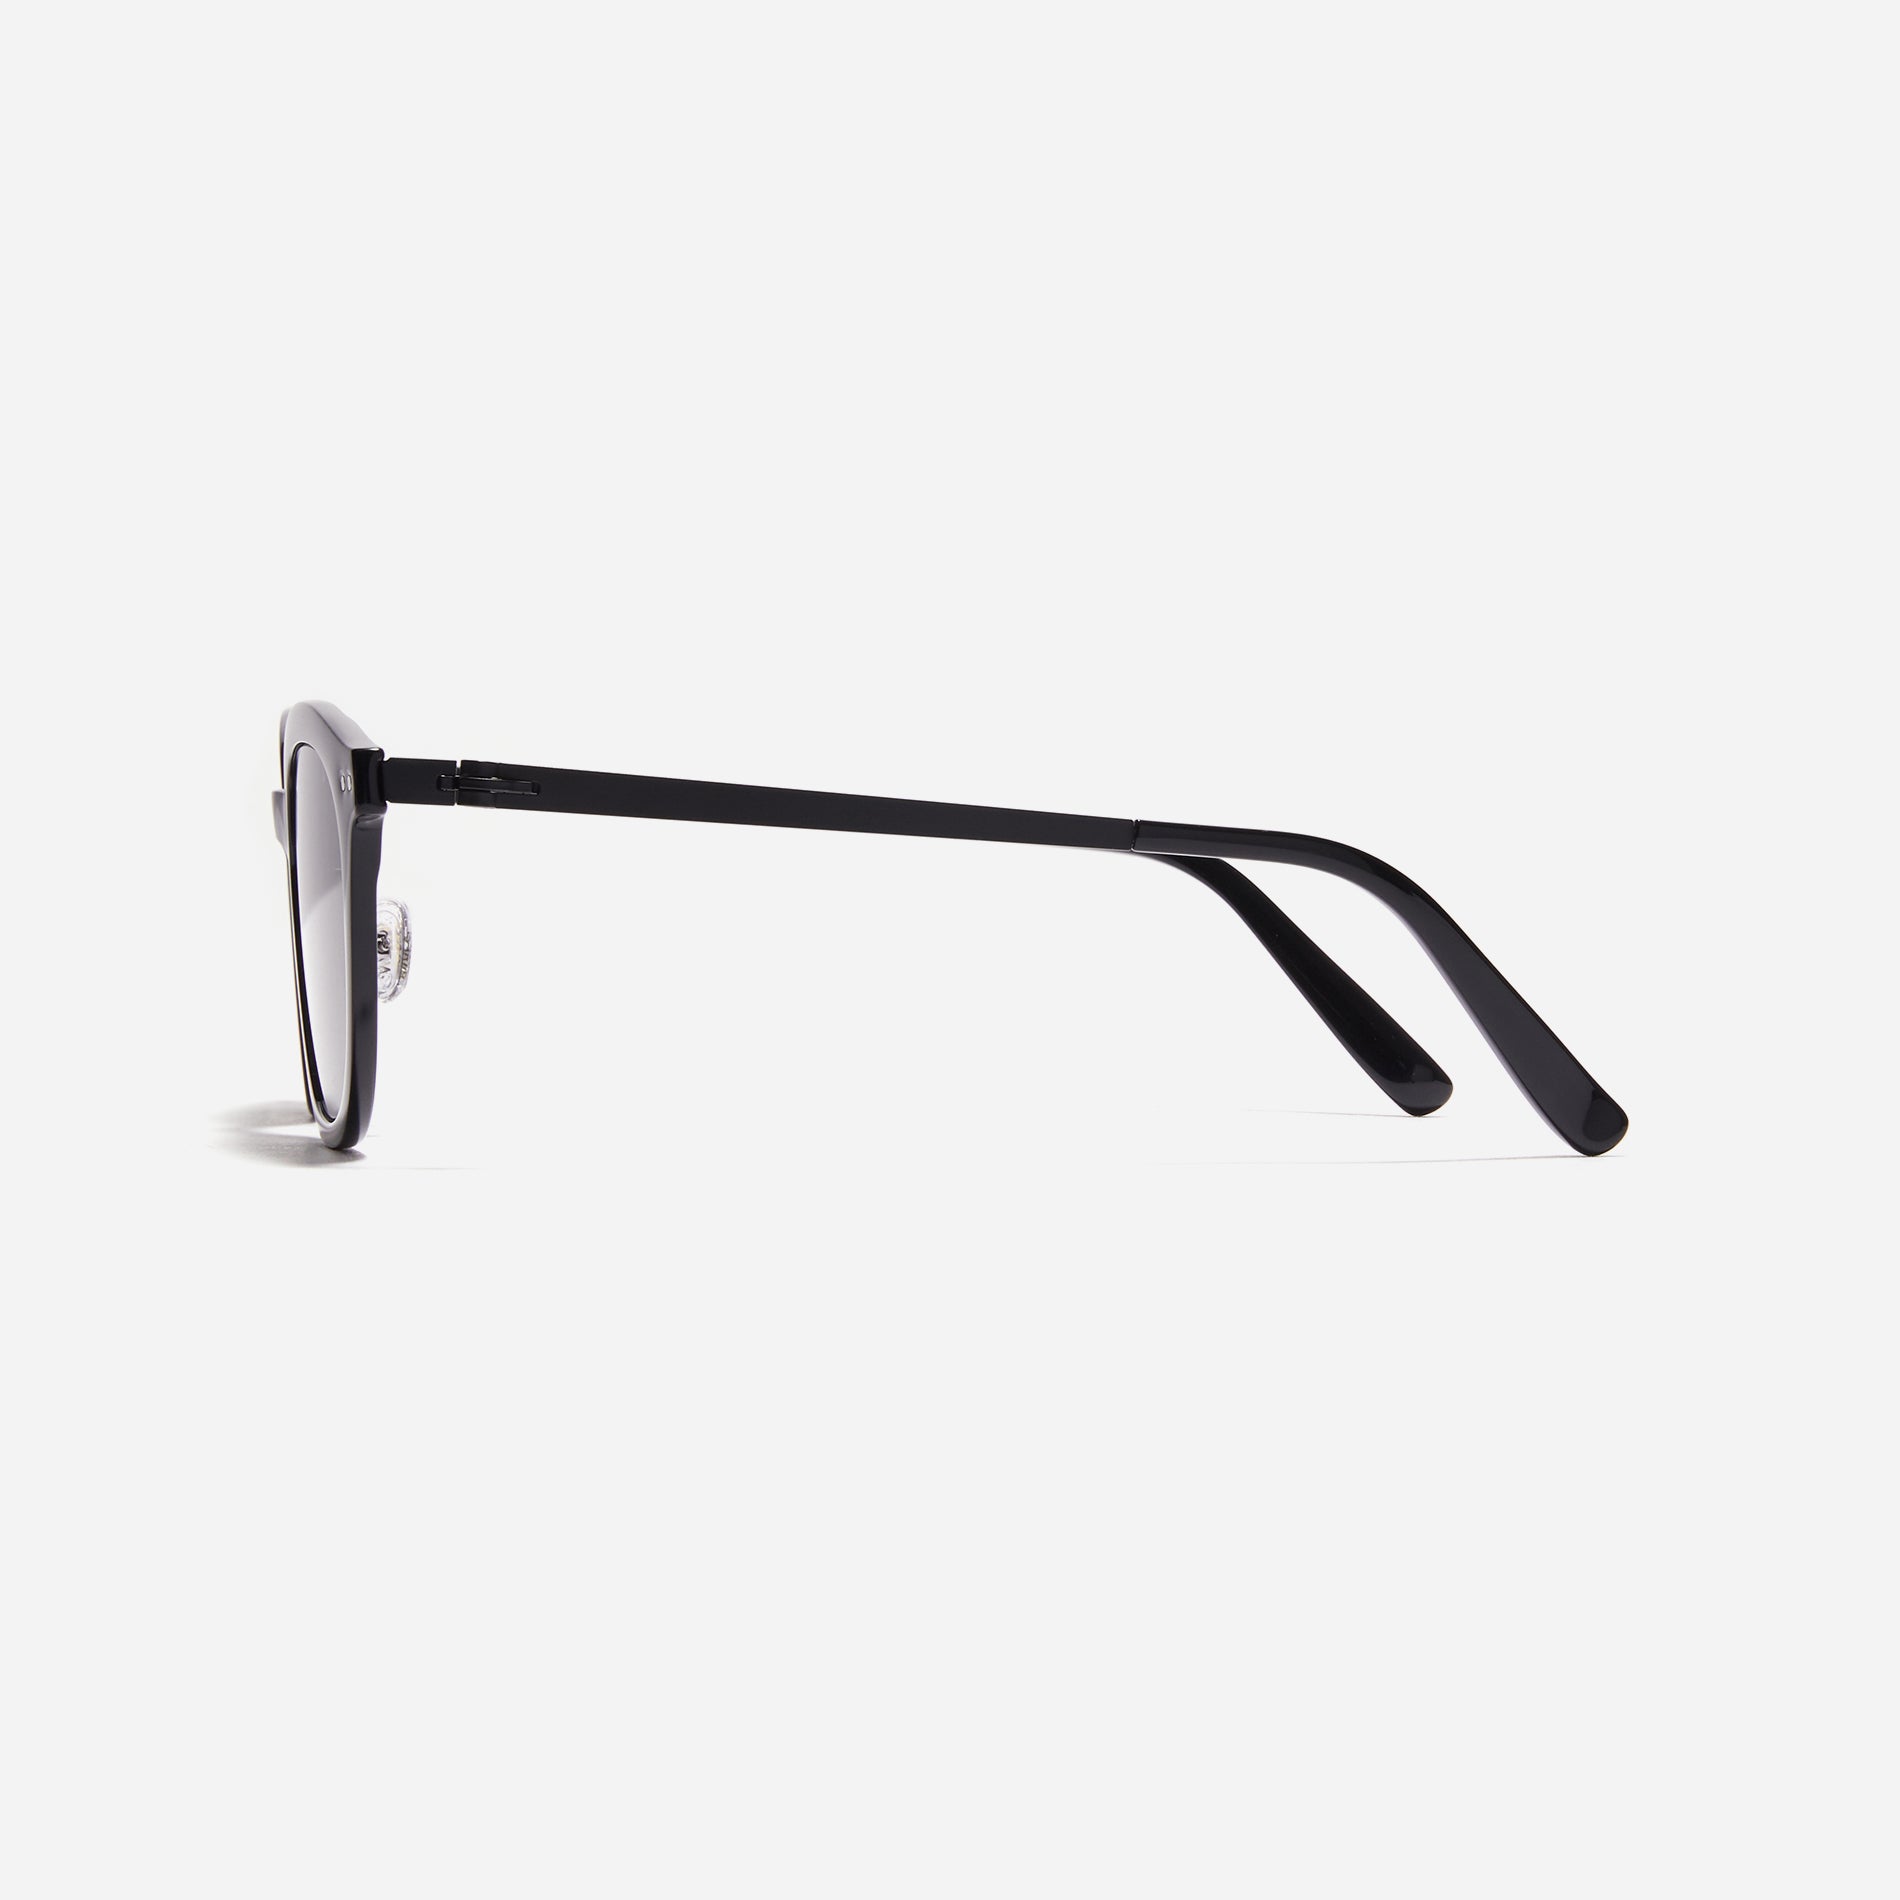 Square-shaped Boston sunglasses from the POLARIZED line. Crafted from lightweight and robust bio-plastic, the frame prevents slipping and offers enduring comfort with CARIN's patented screwless hinges.